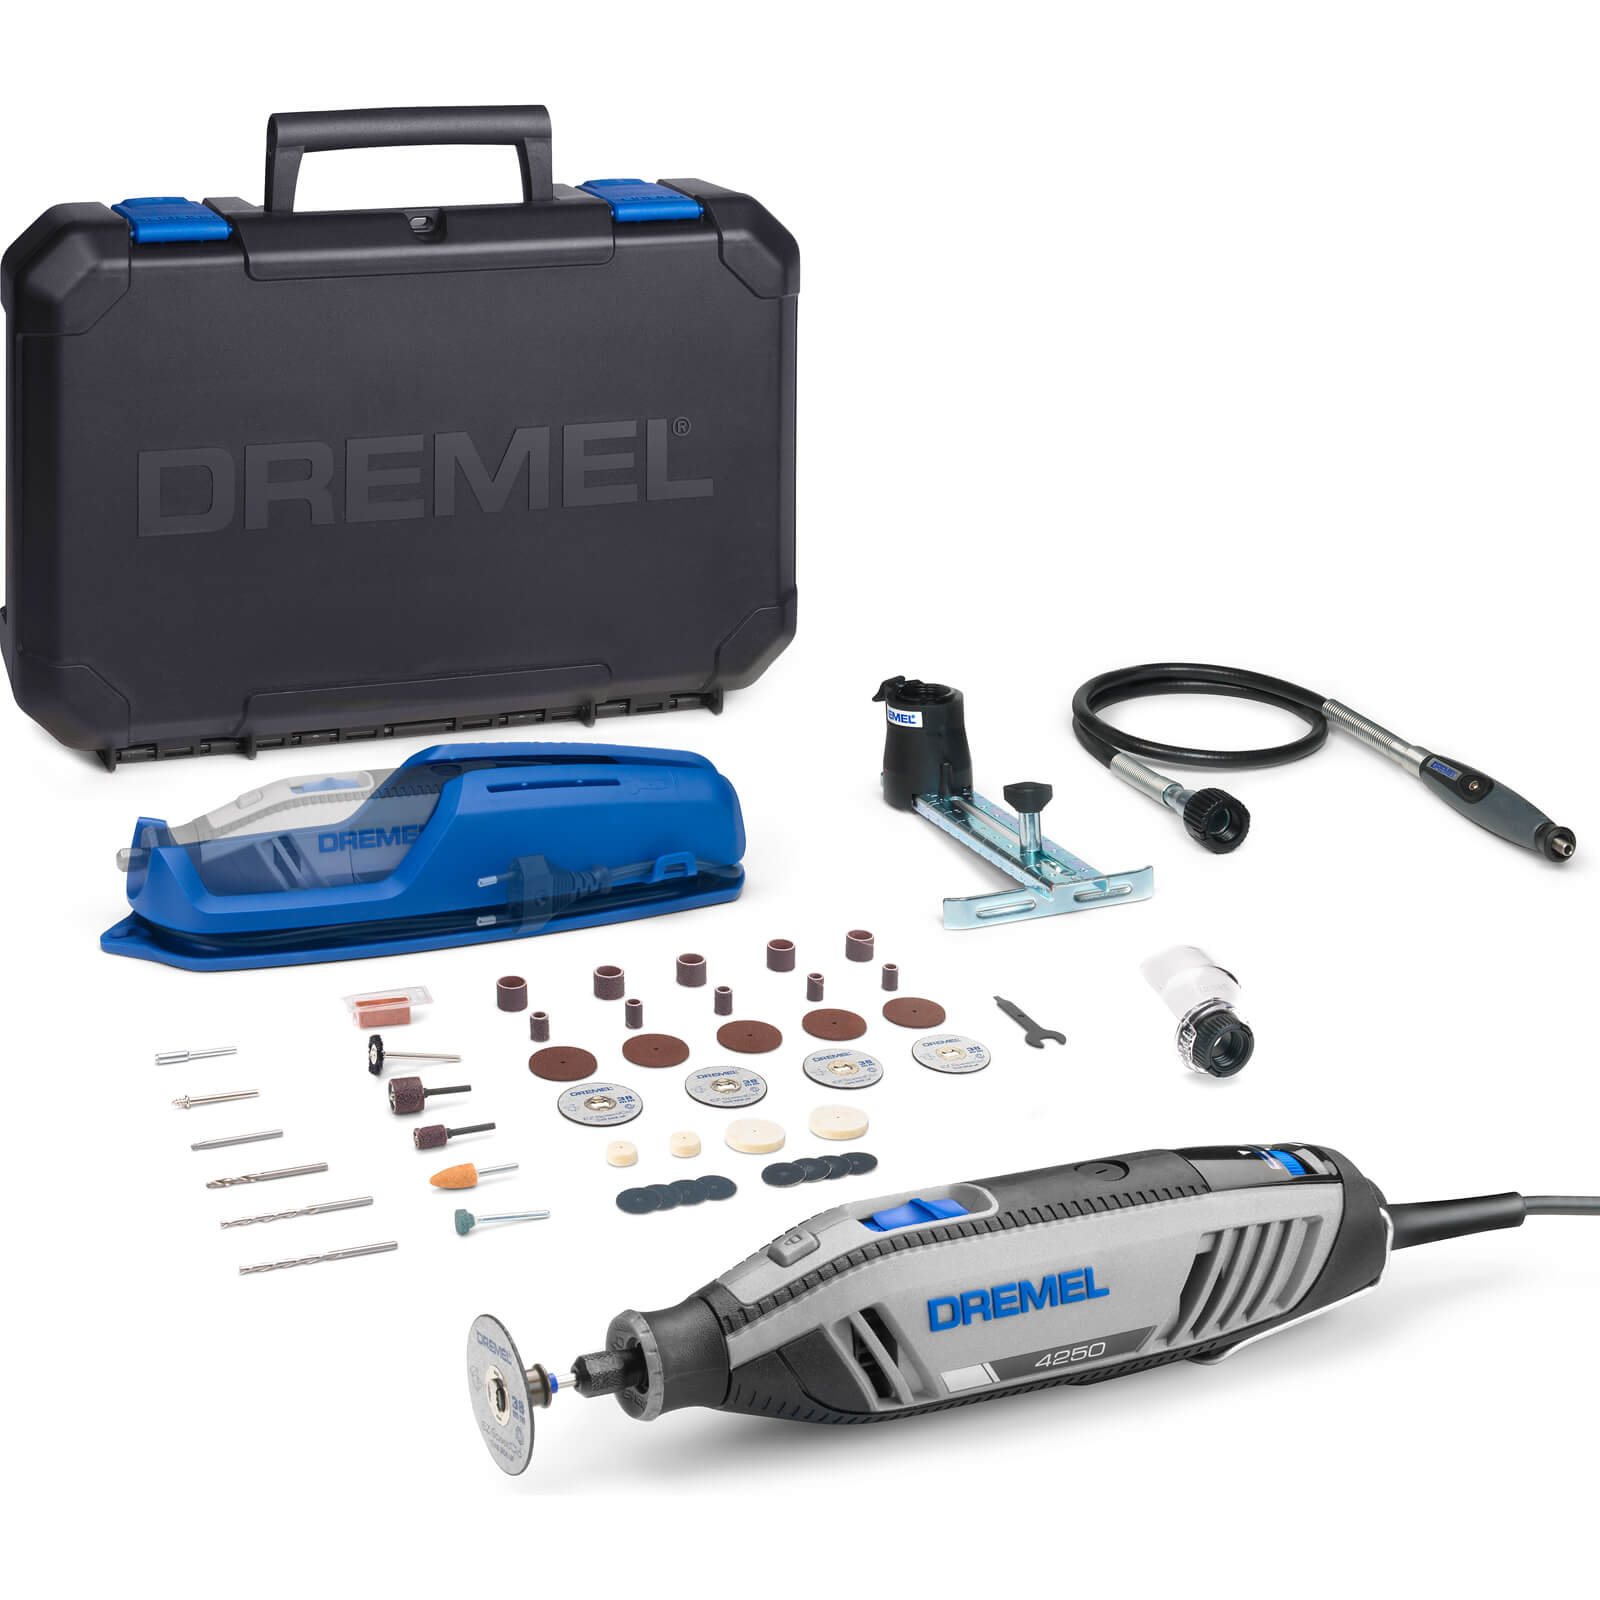 Image of Dremel 4250 Rotary Multi Tool Kit and 45 Accessories